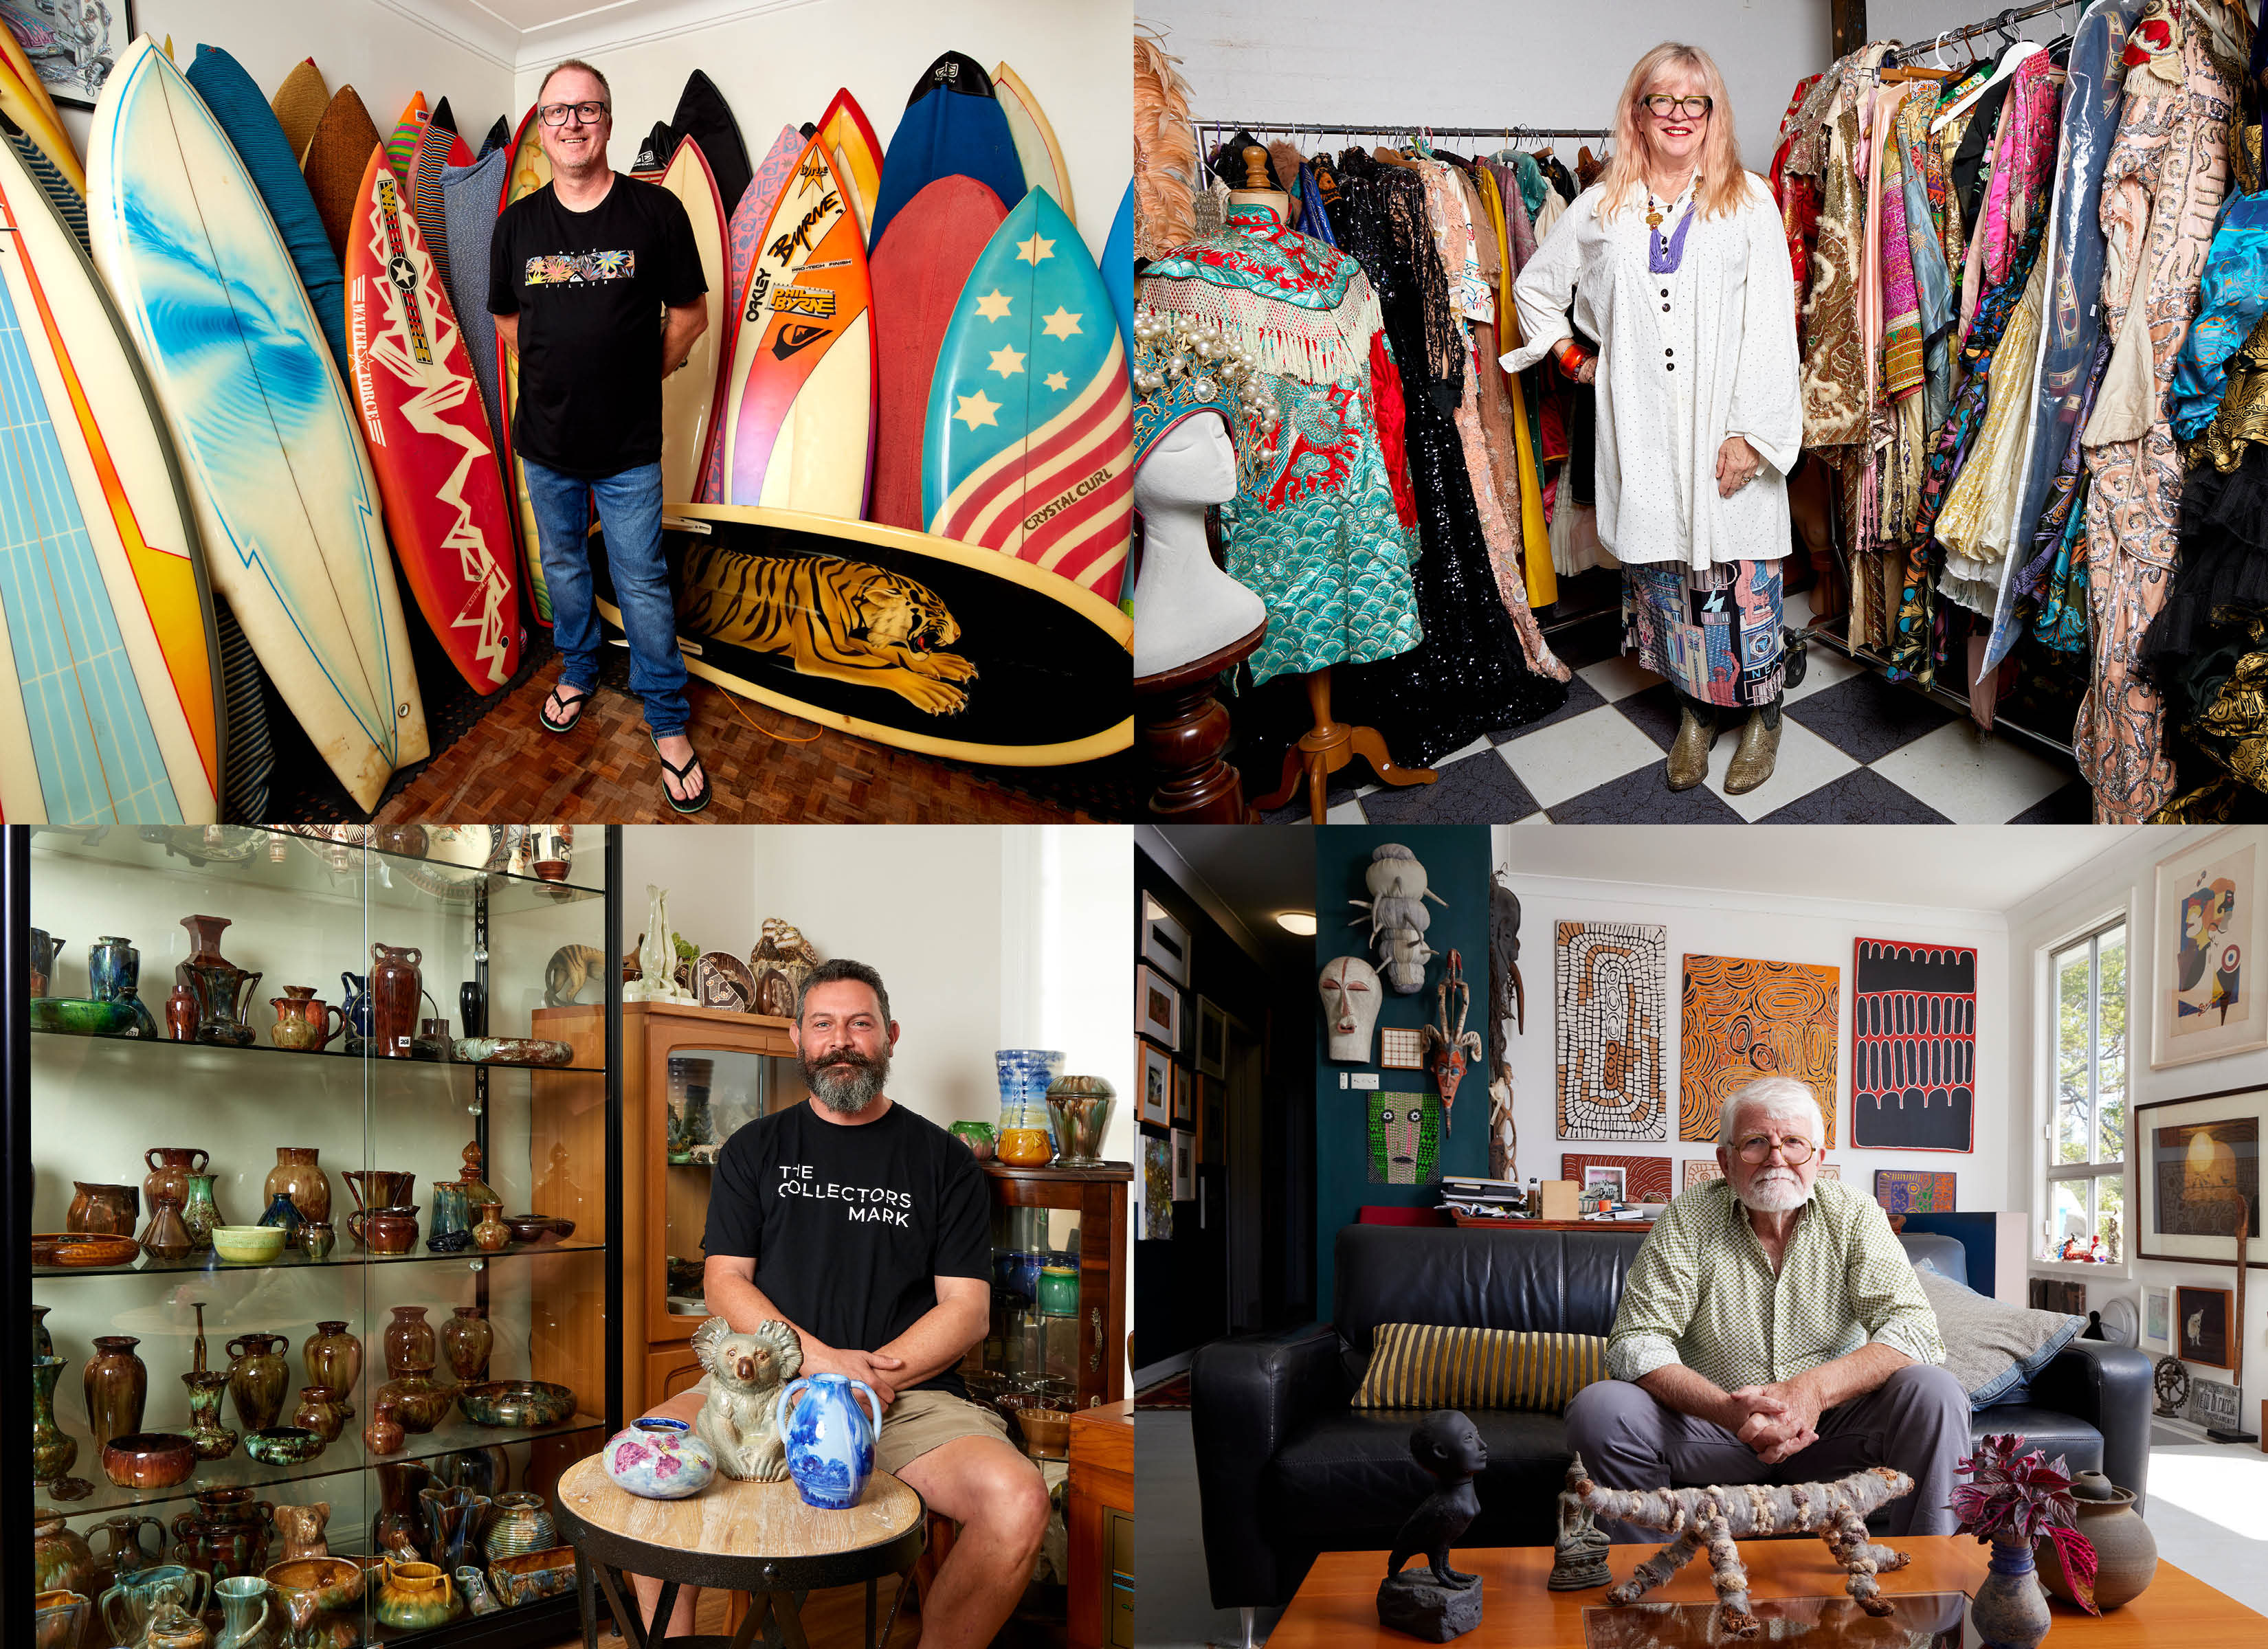 Composite image of four key collectors, clockwise from top left: Adam Scard with surfboard collection; Glennis Murphy with vintage fashion collection; Graham Blondel with contemporary art collection; Michael Vardakis with vintage Australian pottery collection.